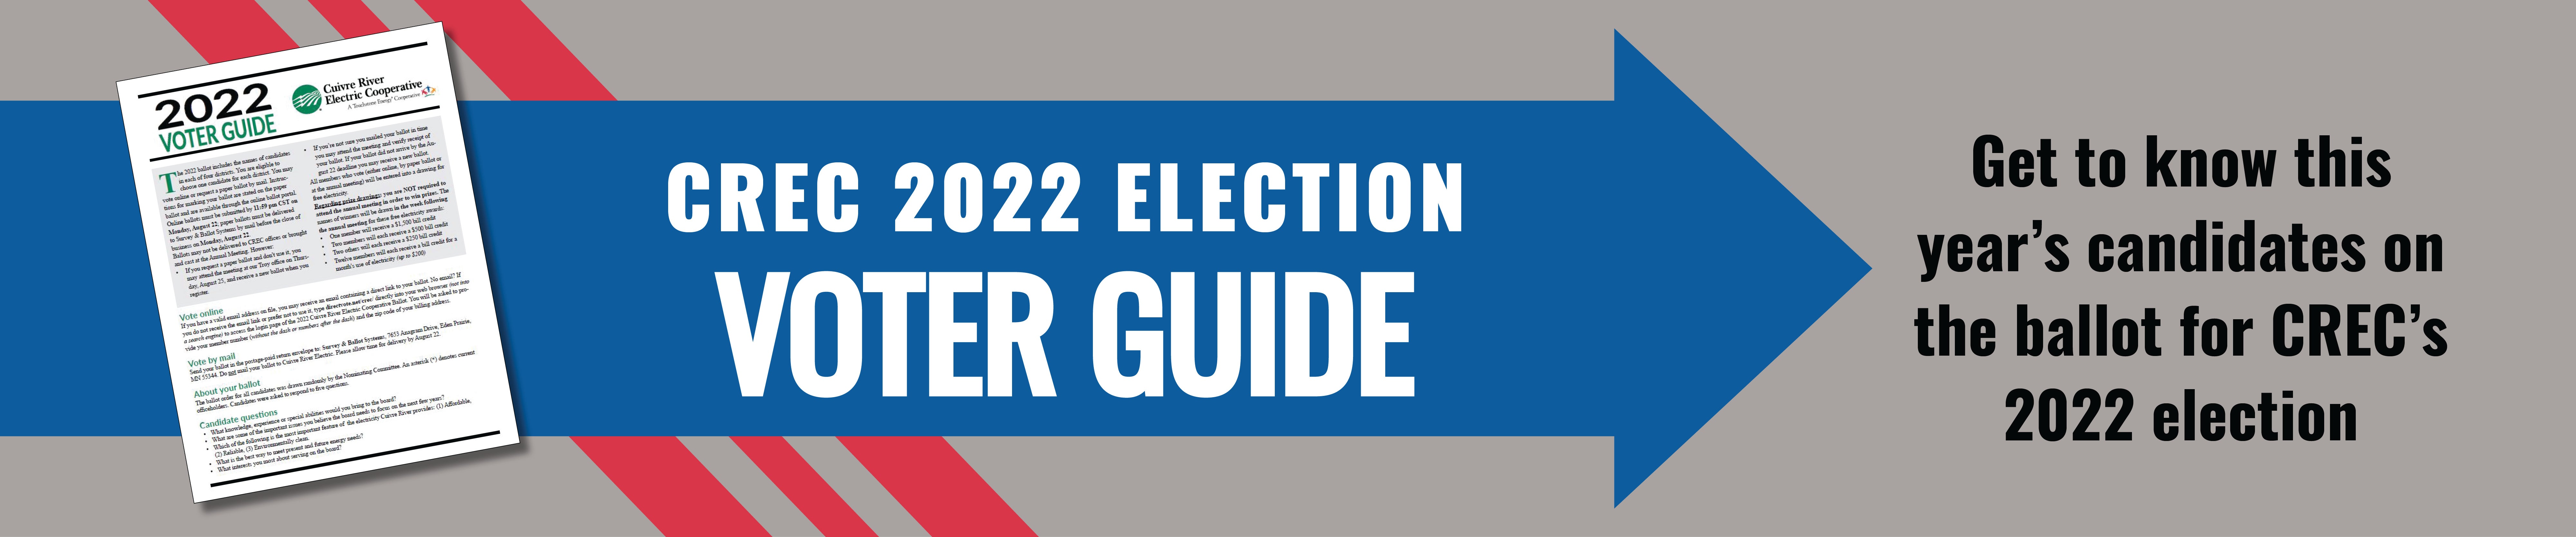 Click here to get to know this year's candidates for the 2022 board election